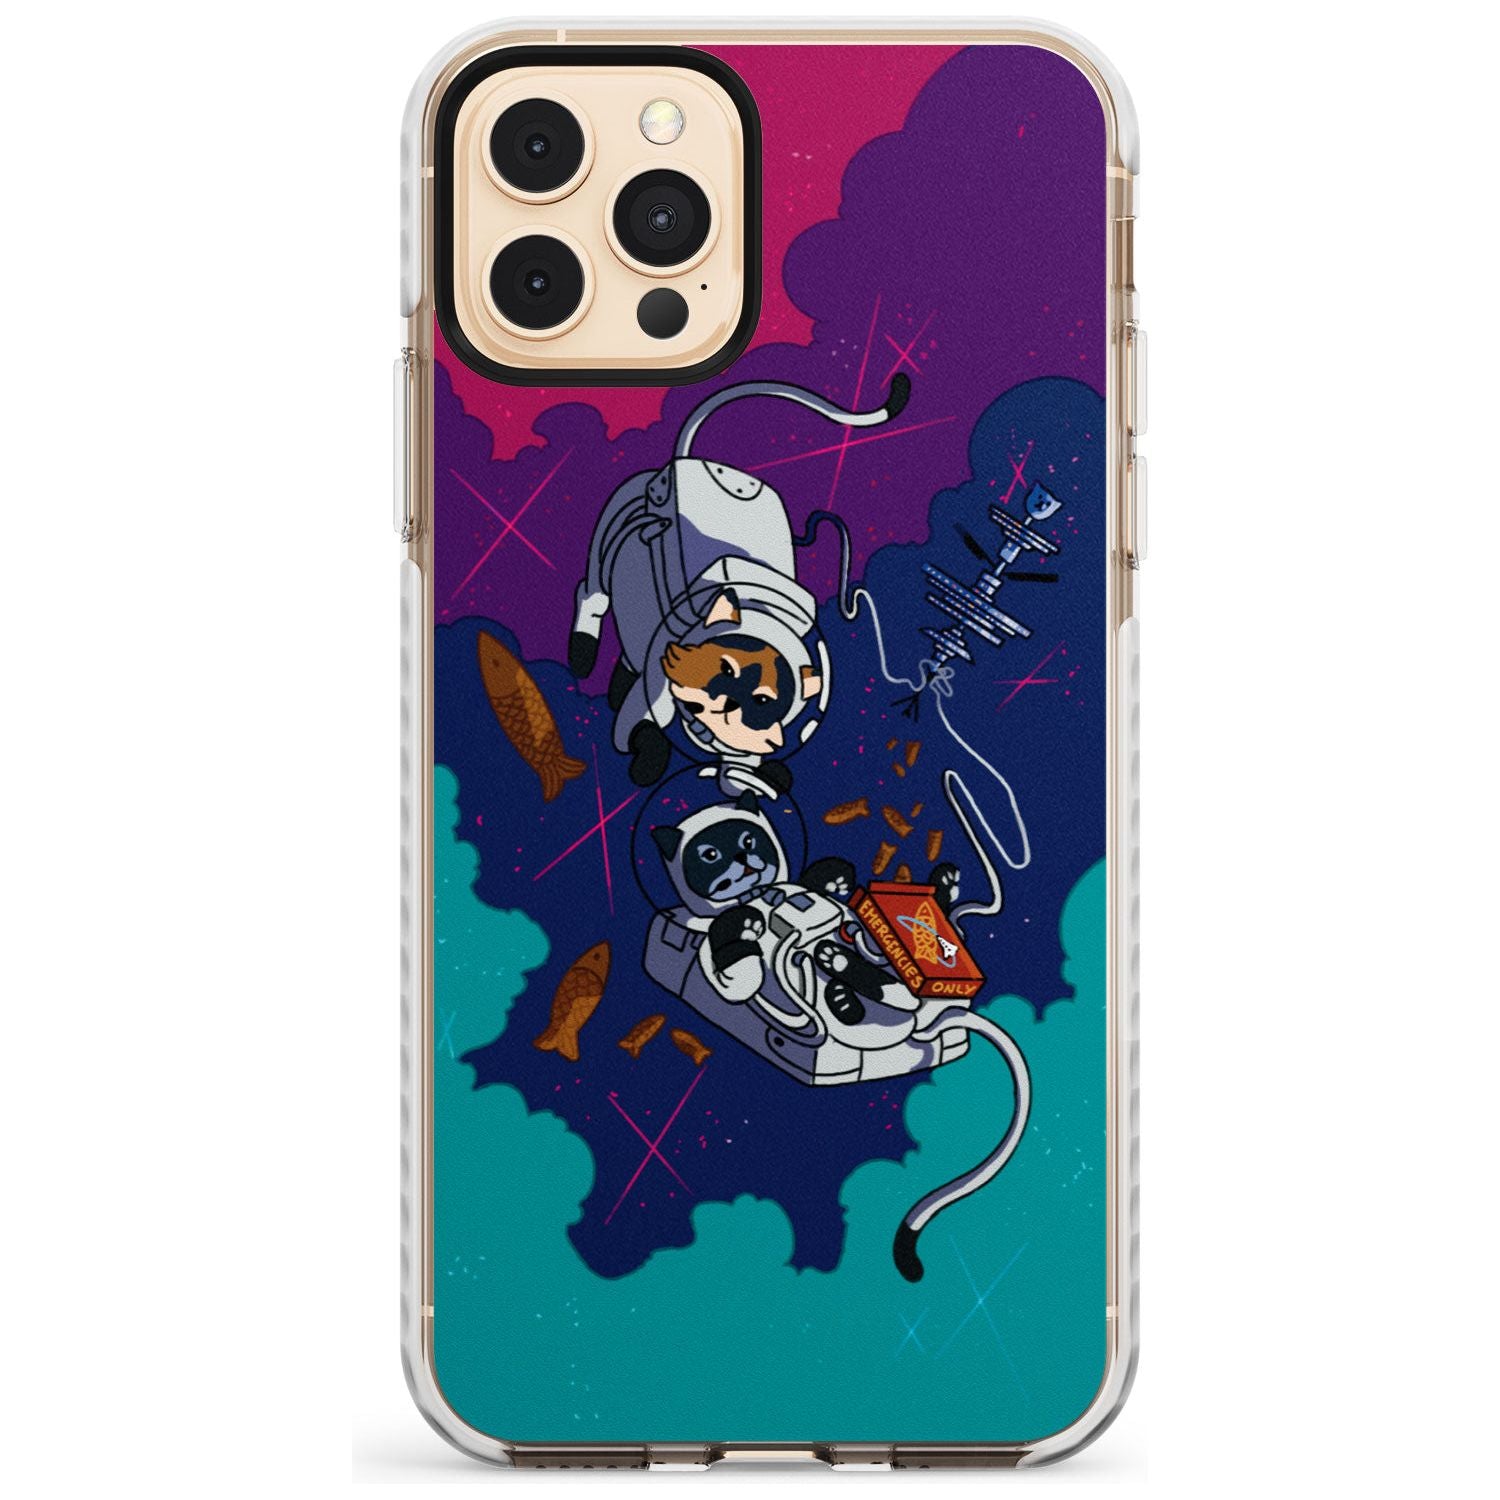 CATS IN SPACE Slim TPU Phone Case for iPhone 11 Pro Max